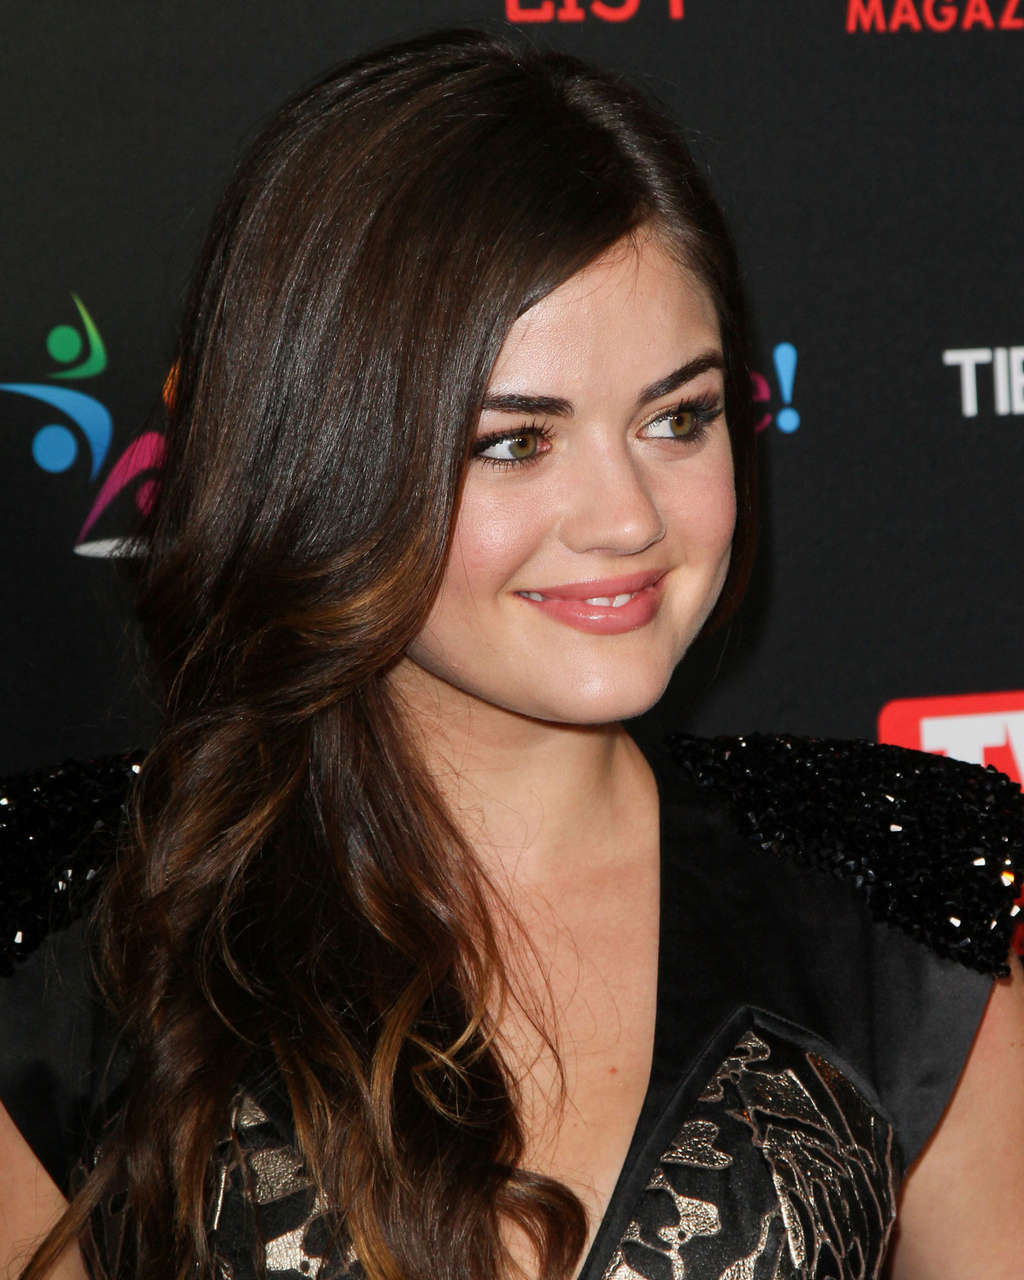 Lucy Hale Tv Guide Magazines Hot List Party